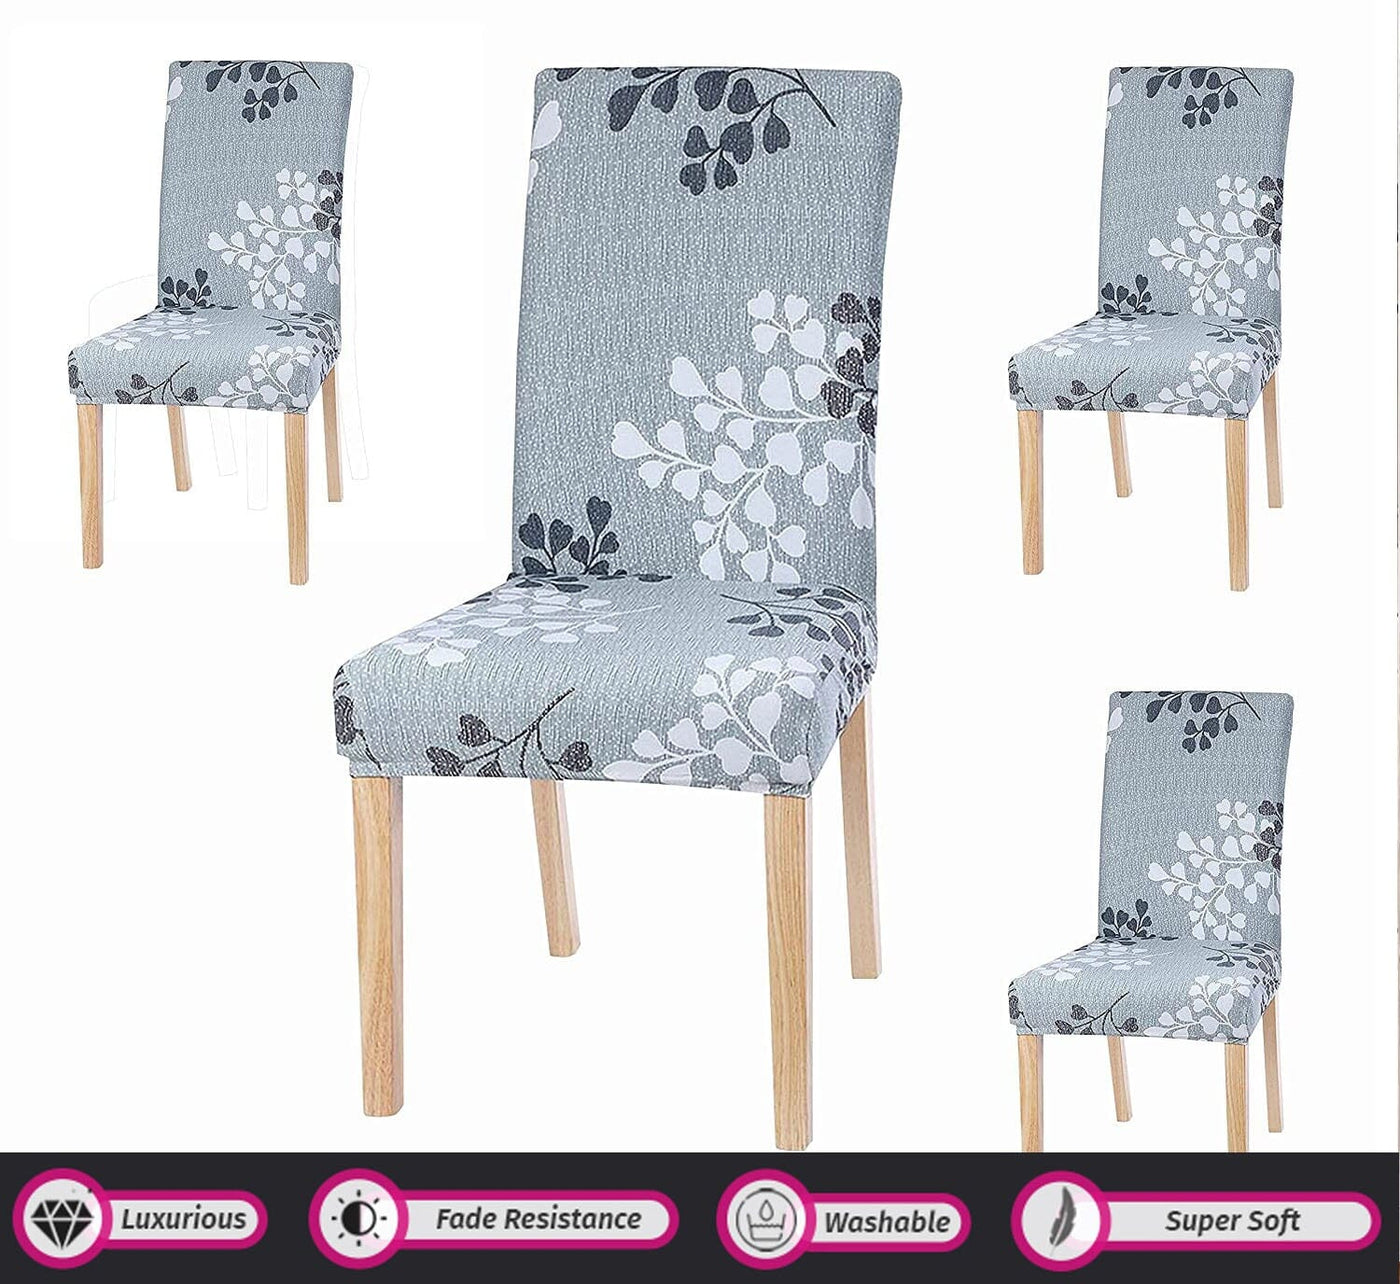 Grey Petals Premium Chair Cover - Stretchable & Elastic Fitted Great Happy IN 2 PCS - ₹799 